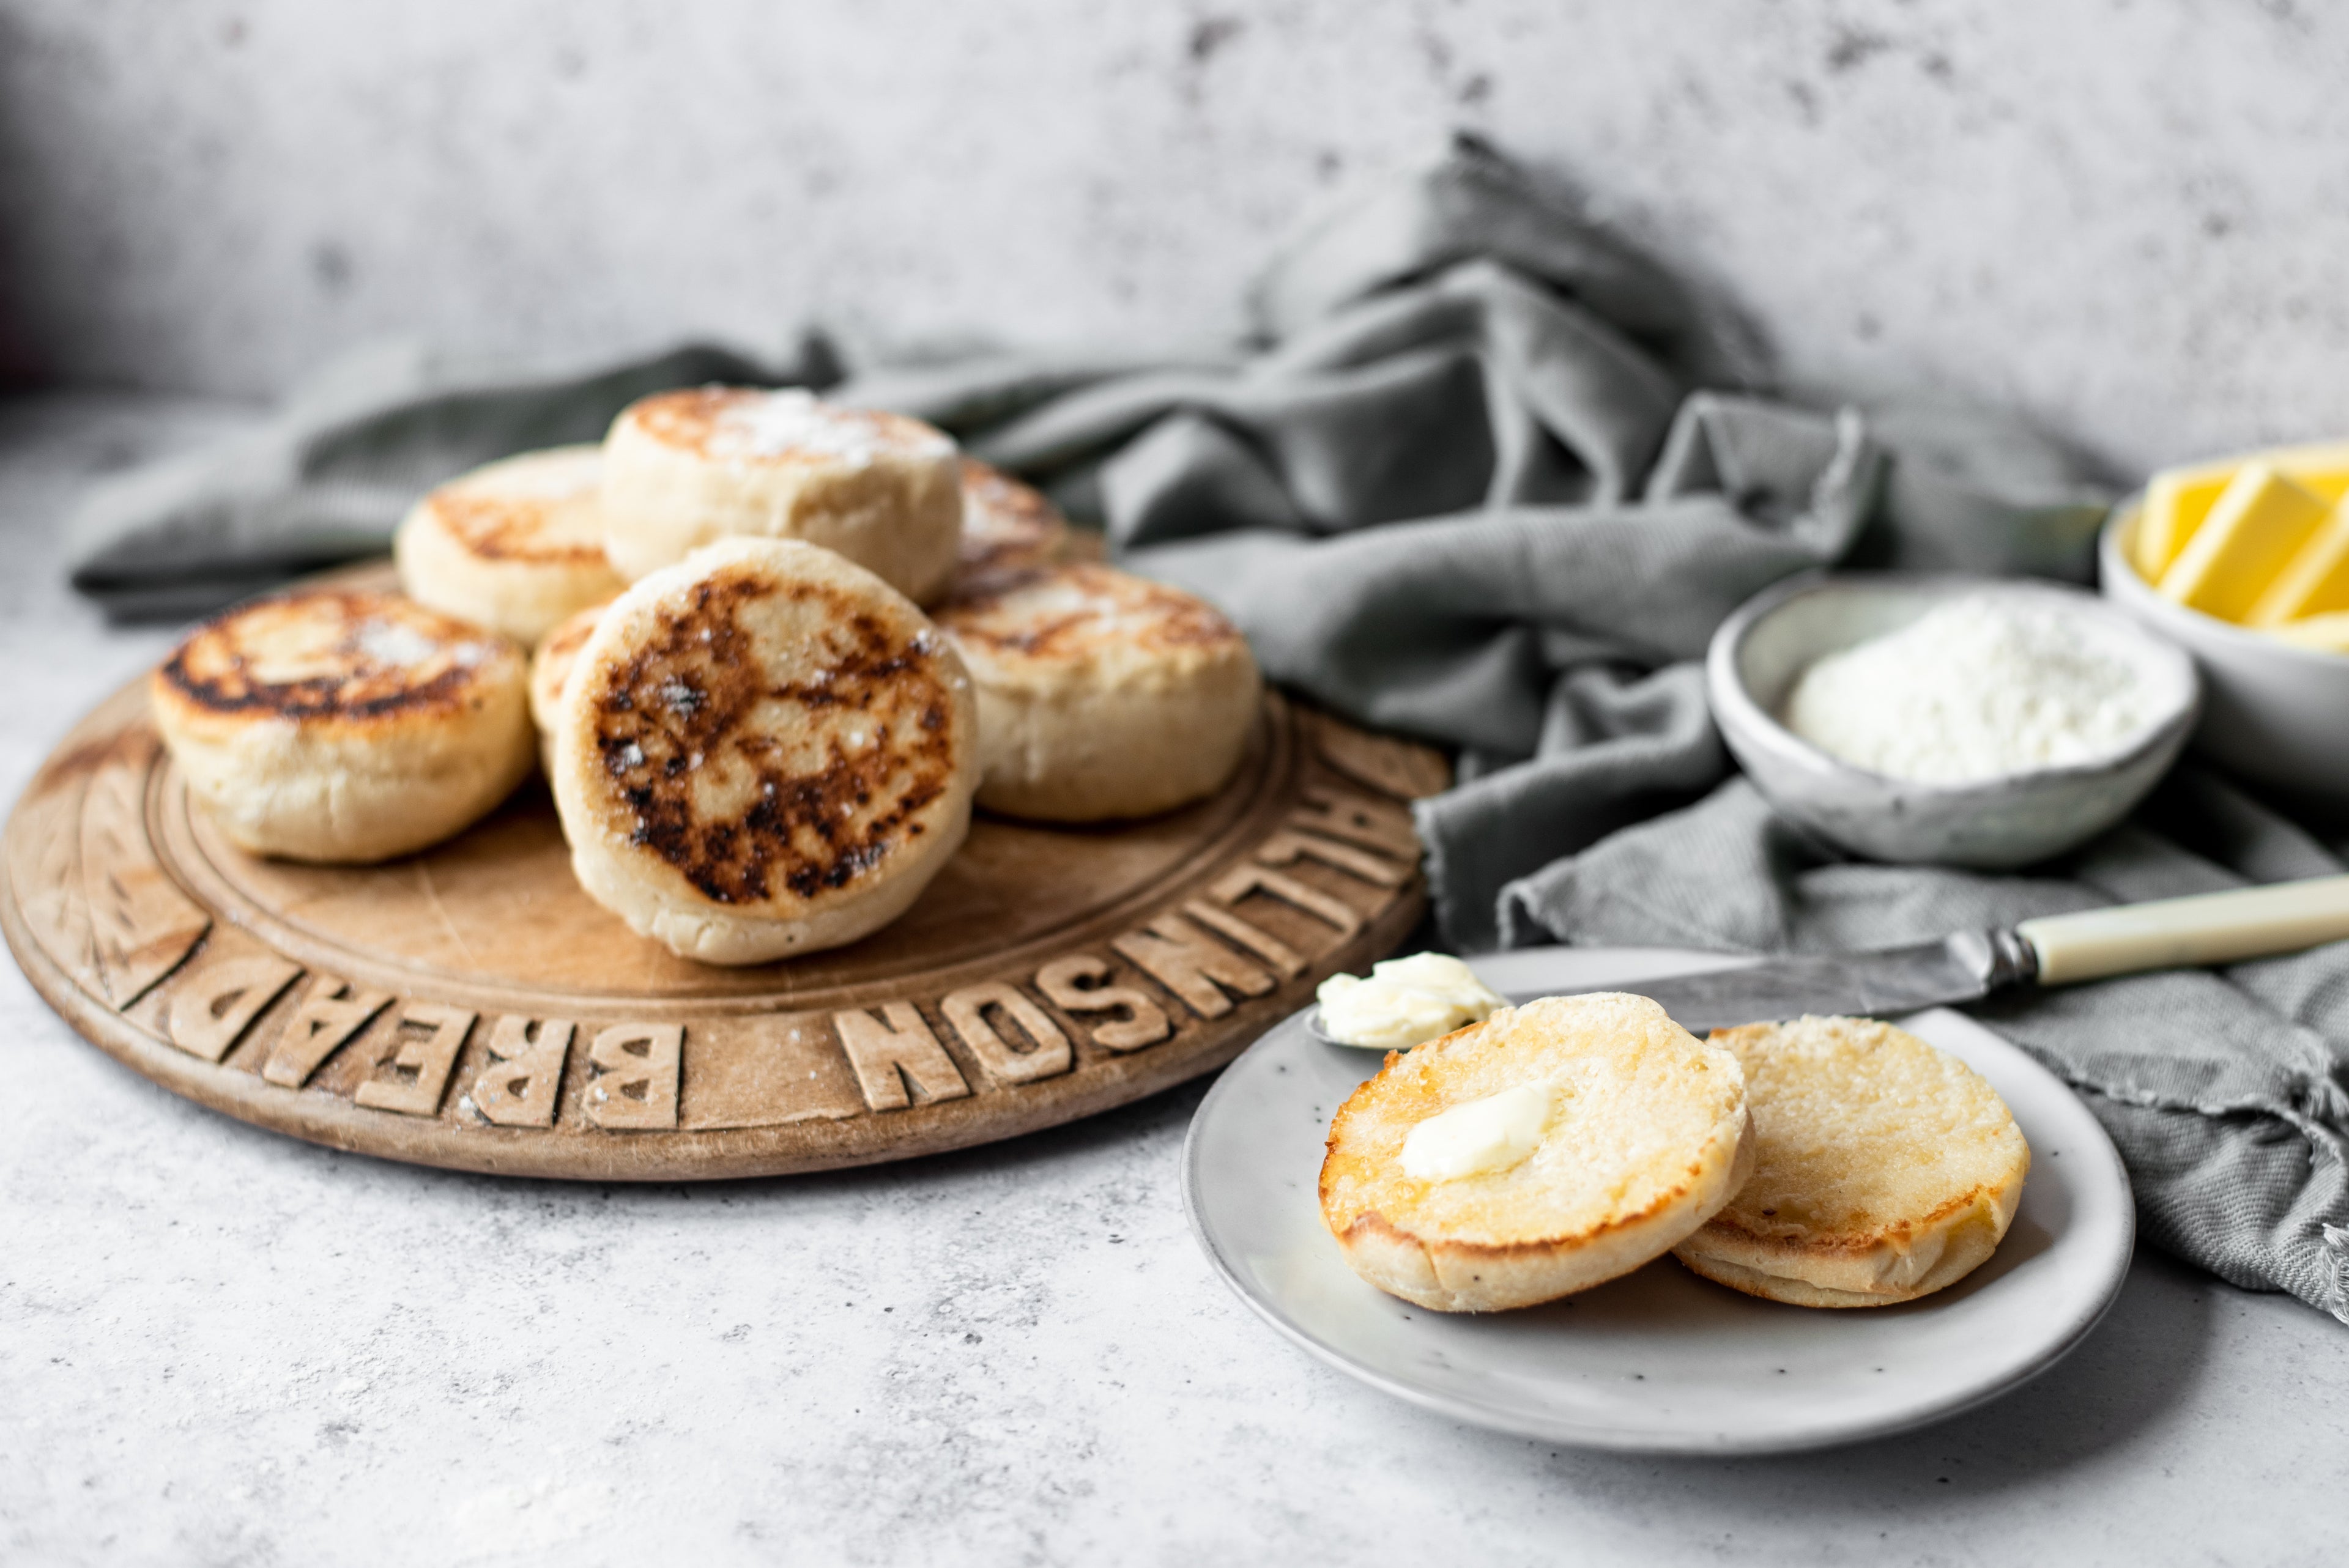 Allinsons-English-Muffins-FULL-RES-7.jpg